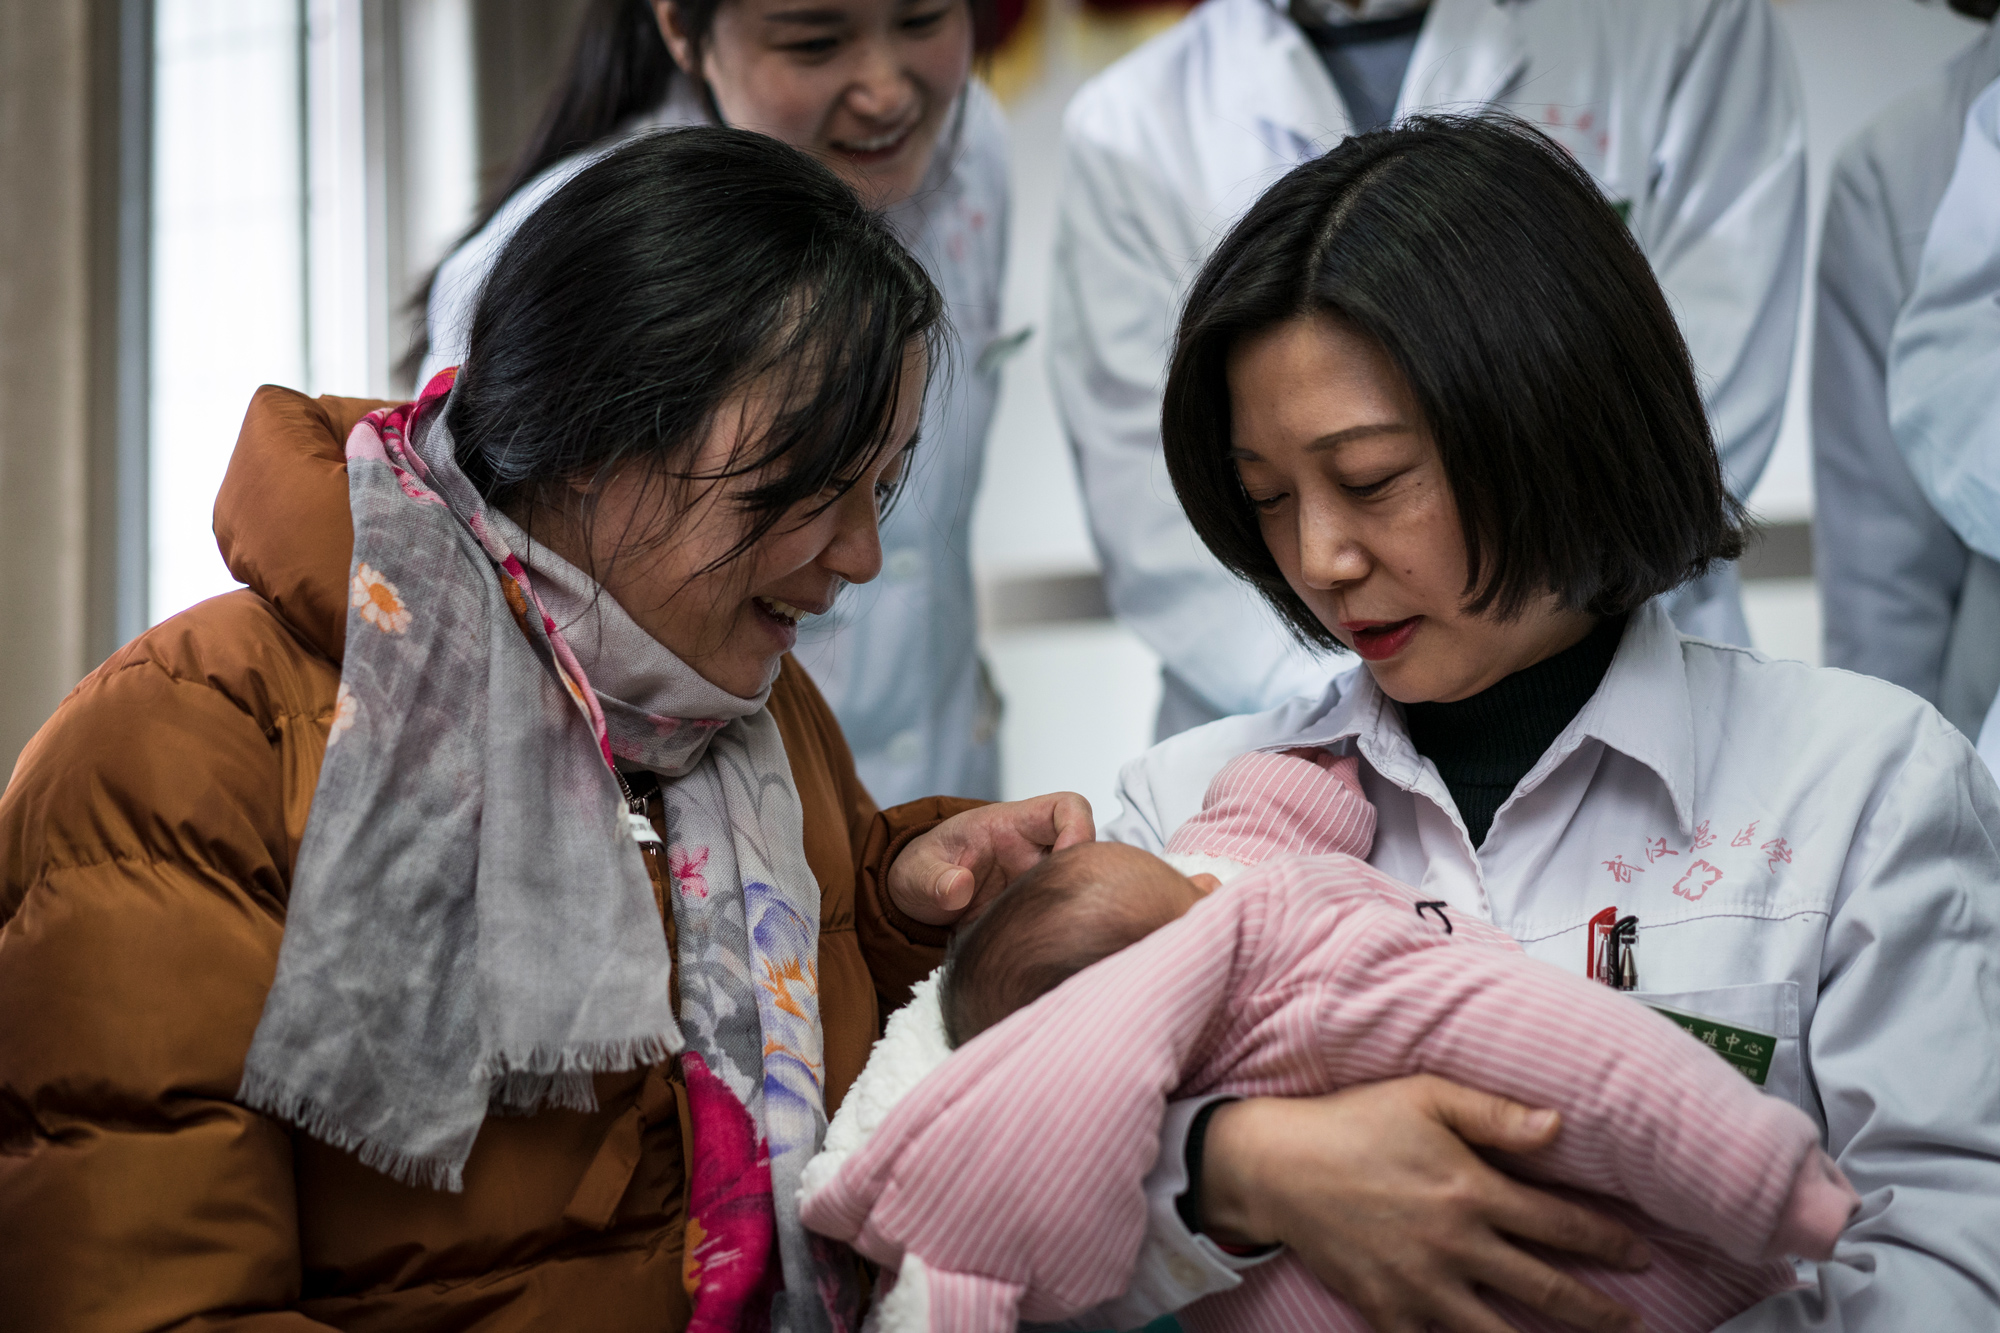 After “zuo yue zi,” or “sitting the month”––a Chinese tradition of restricting diet and activities for the first month after a woman gives birth––Zhiying and Fangguo bring the twins to the doctor who helped them with IVF, and express their gratitude, January 9, 2018.  